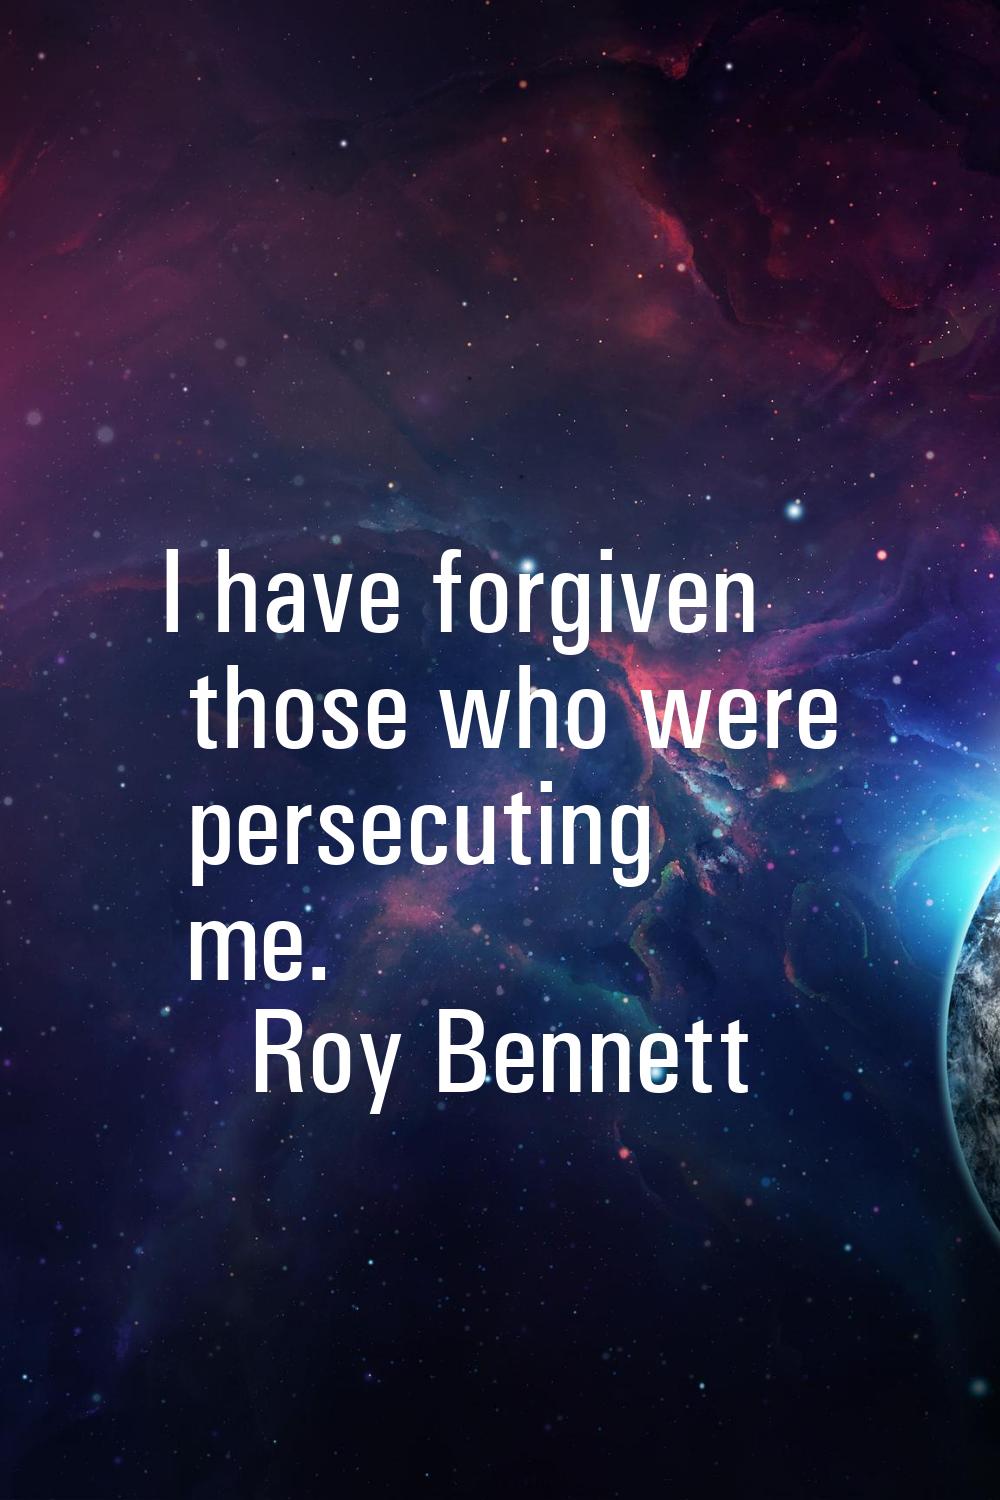 I have forgiven those who were persecuting me.